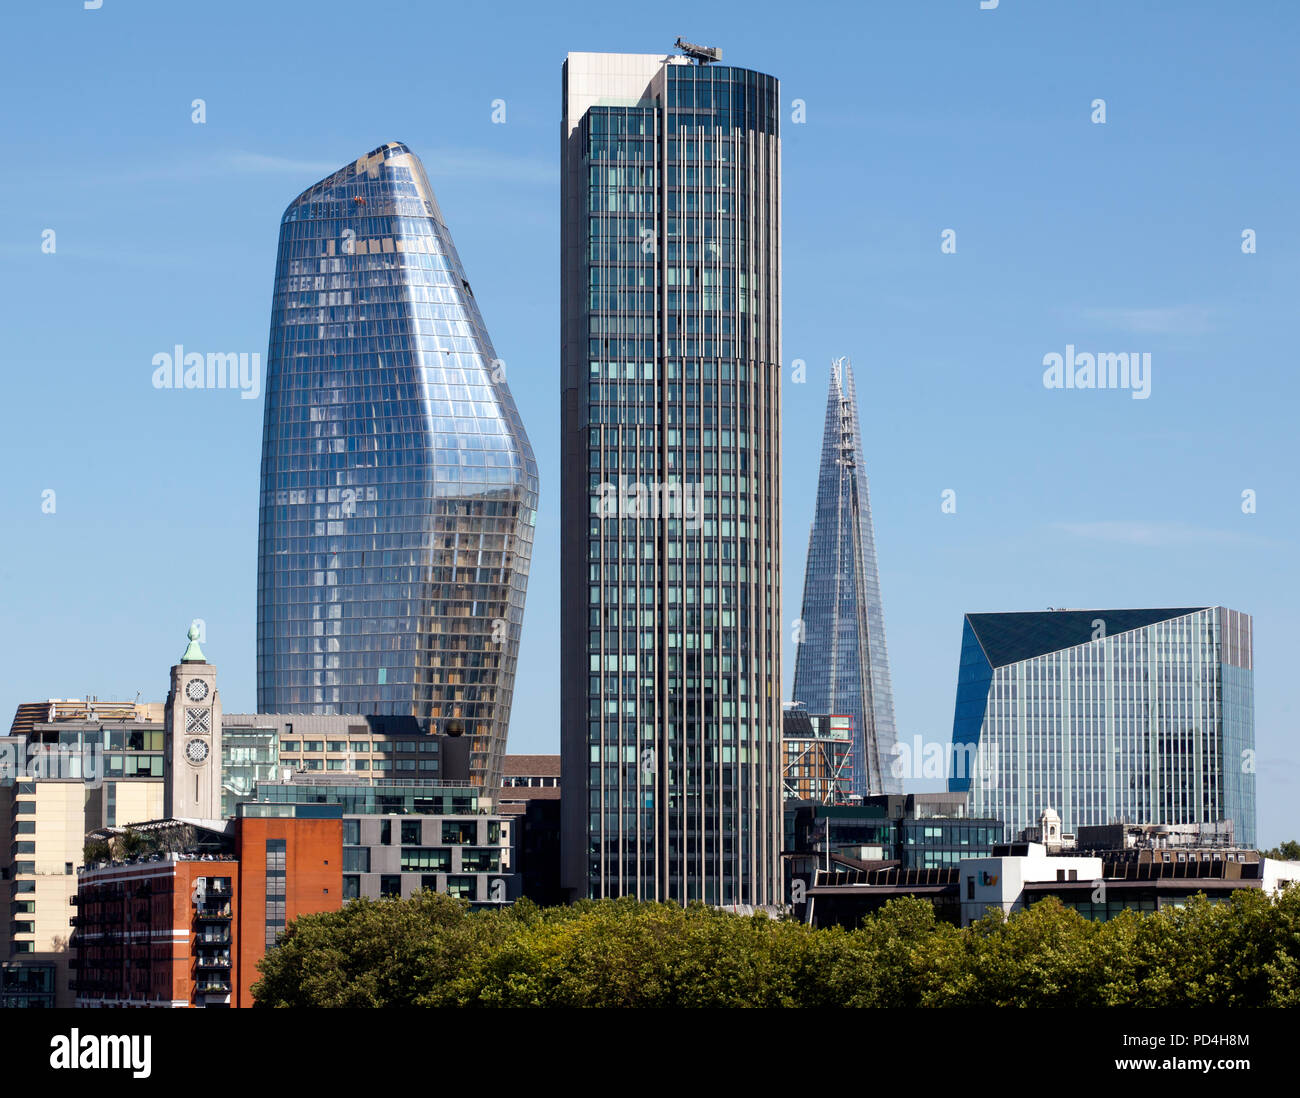 View of the Oxo Tower, One Blackfriars, The Shard and The South Bank Tower, taken from Waterloo Bridge, London Stock Photo